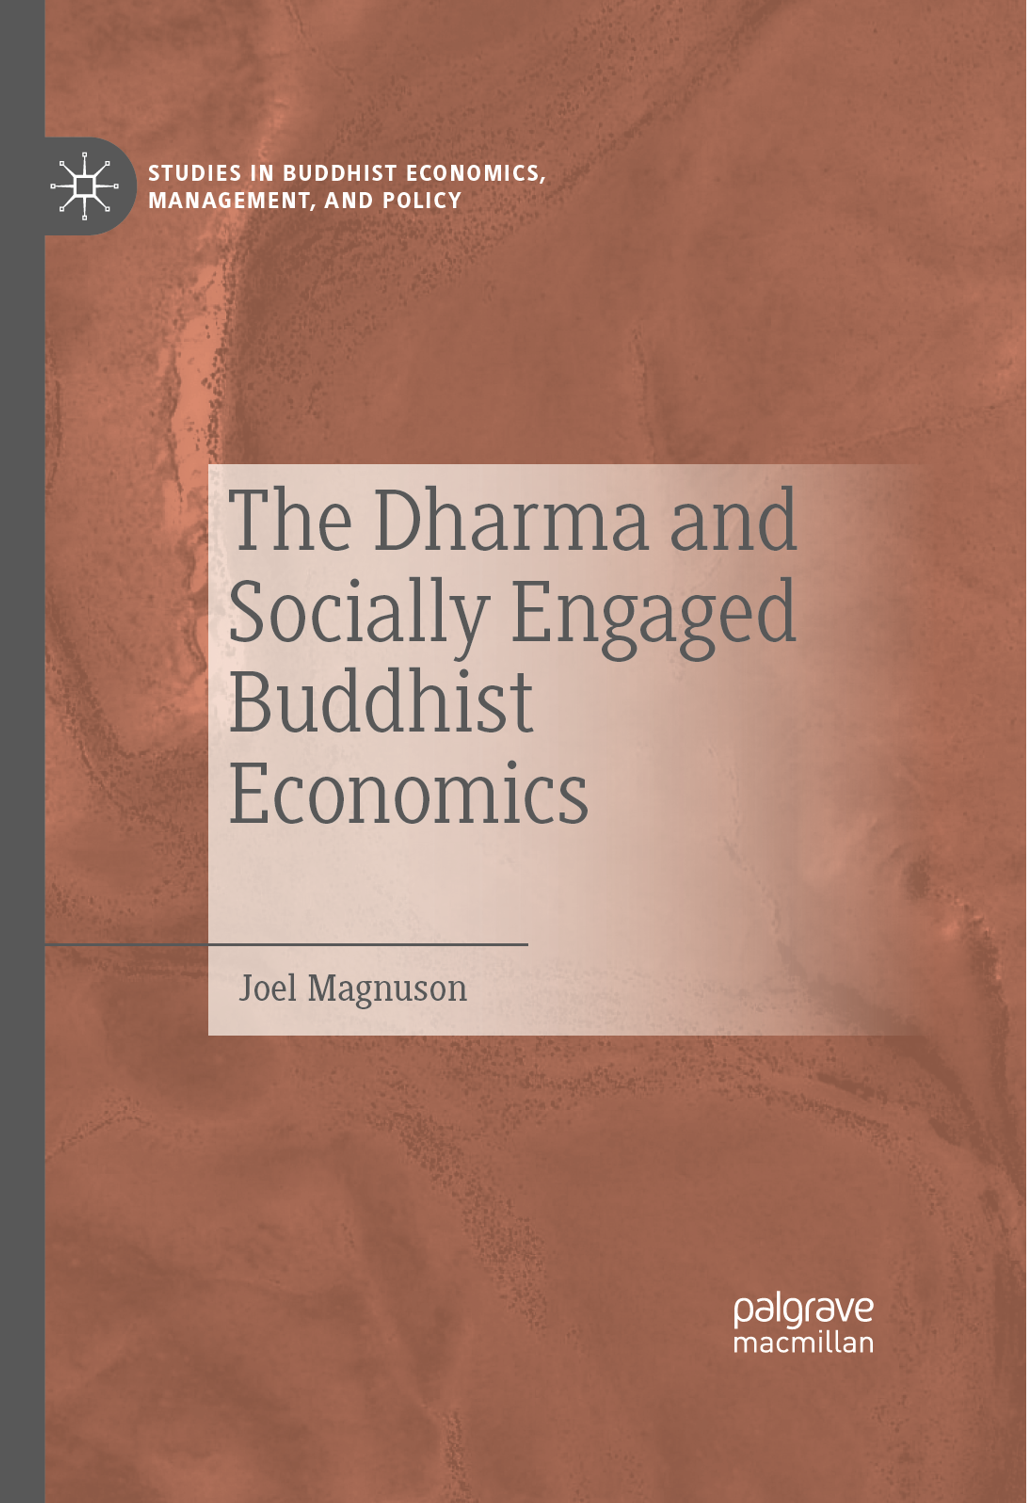 The Dharma and Socially Engaged Buddhism